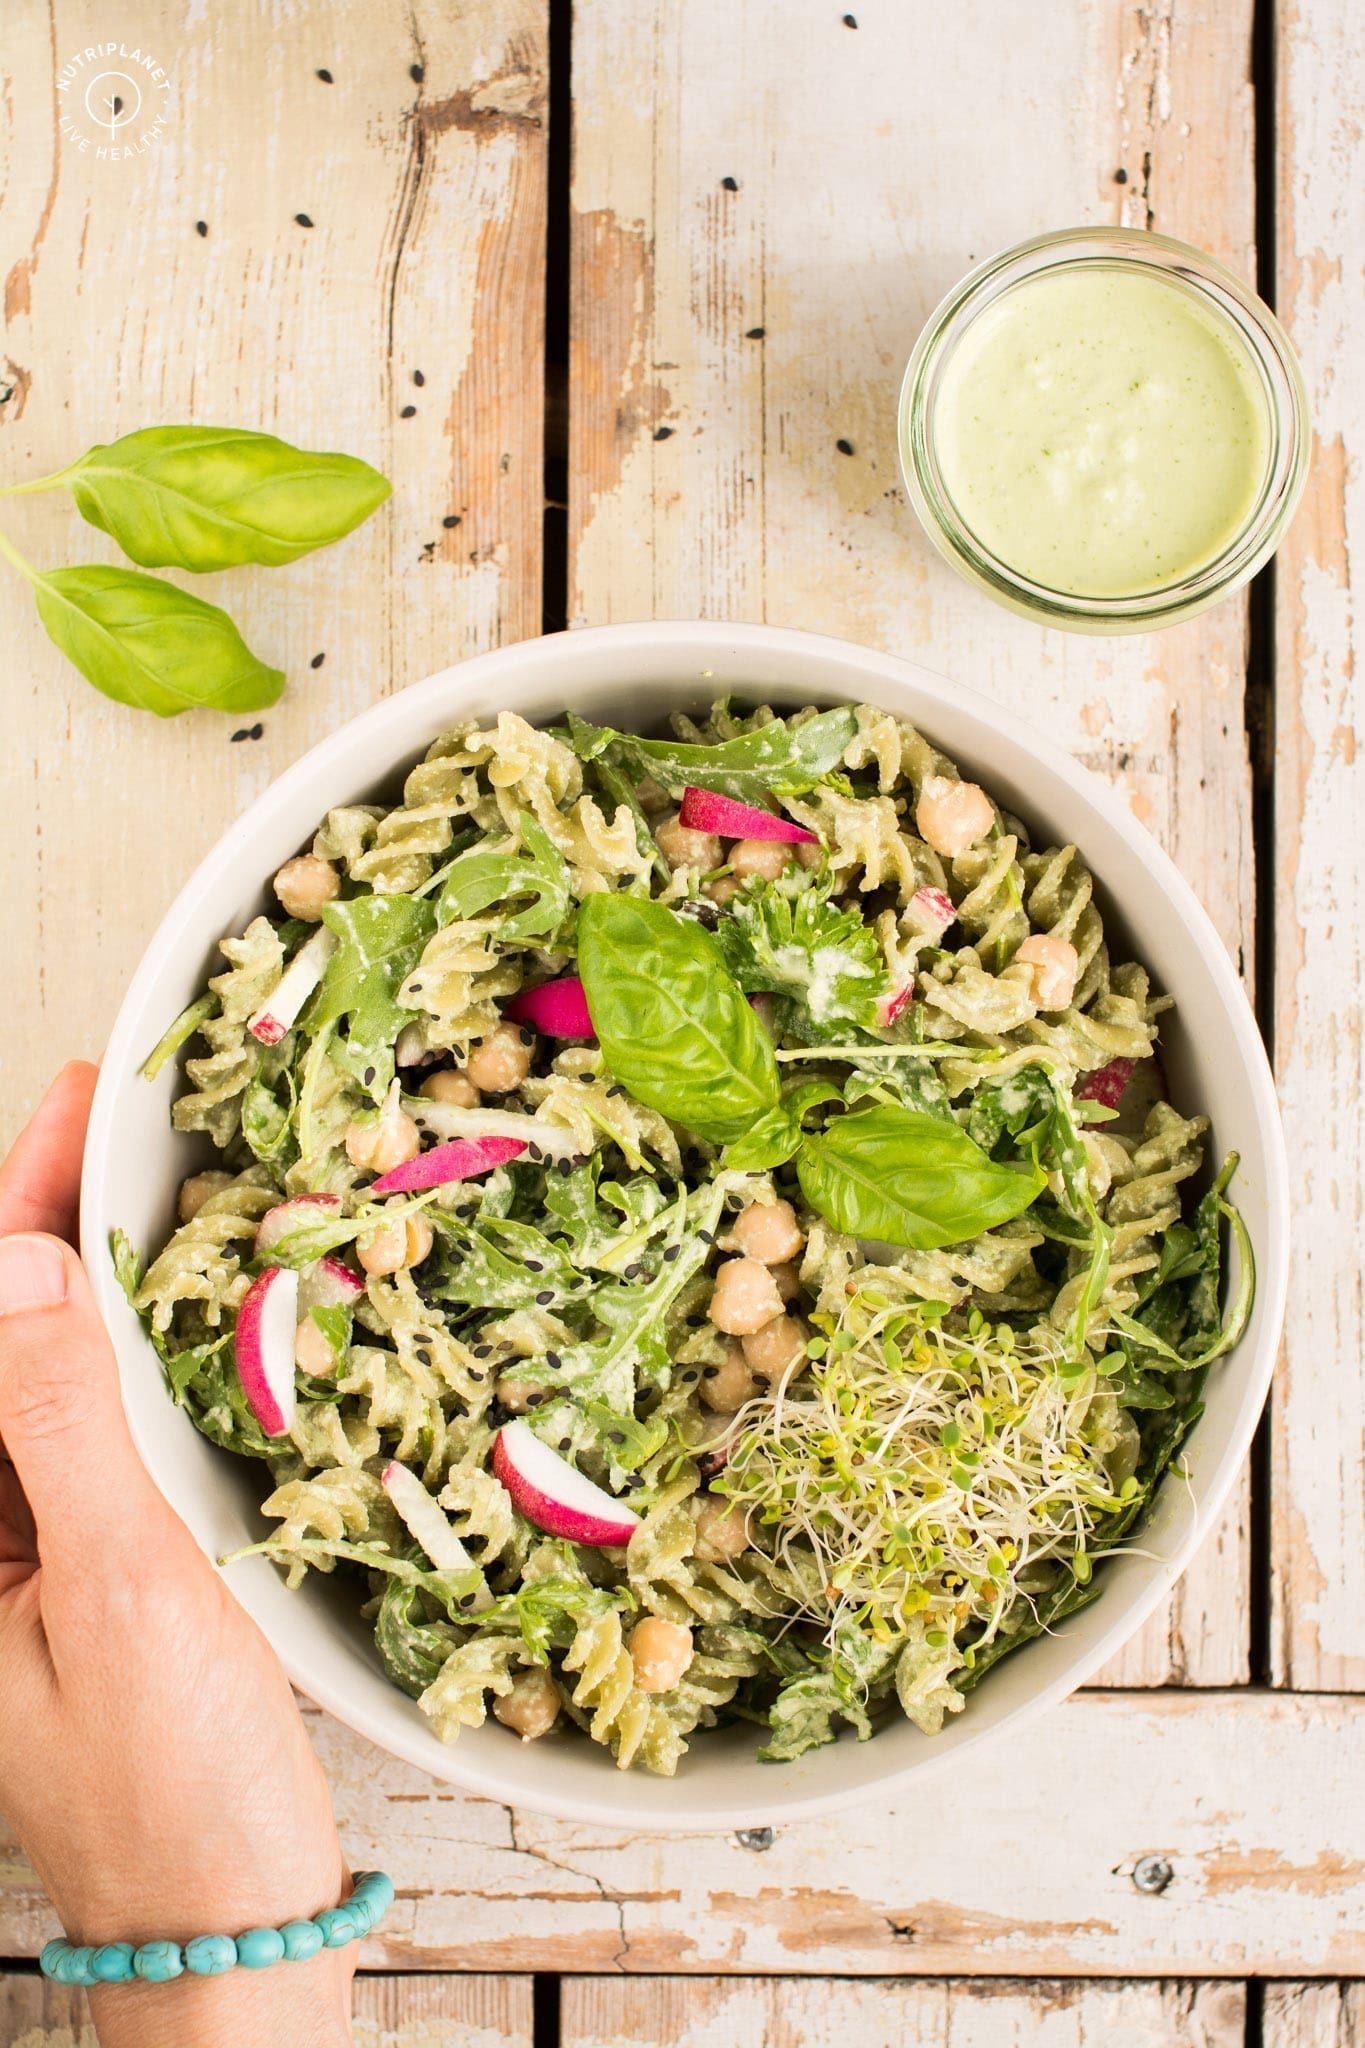 Super easy vegan basil cashew pesto pasta recipe that only requires 10 minutes of your time. 